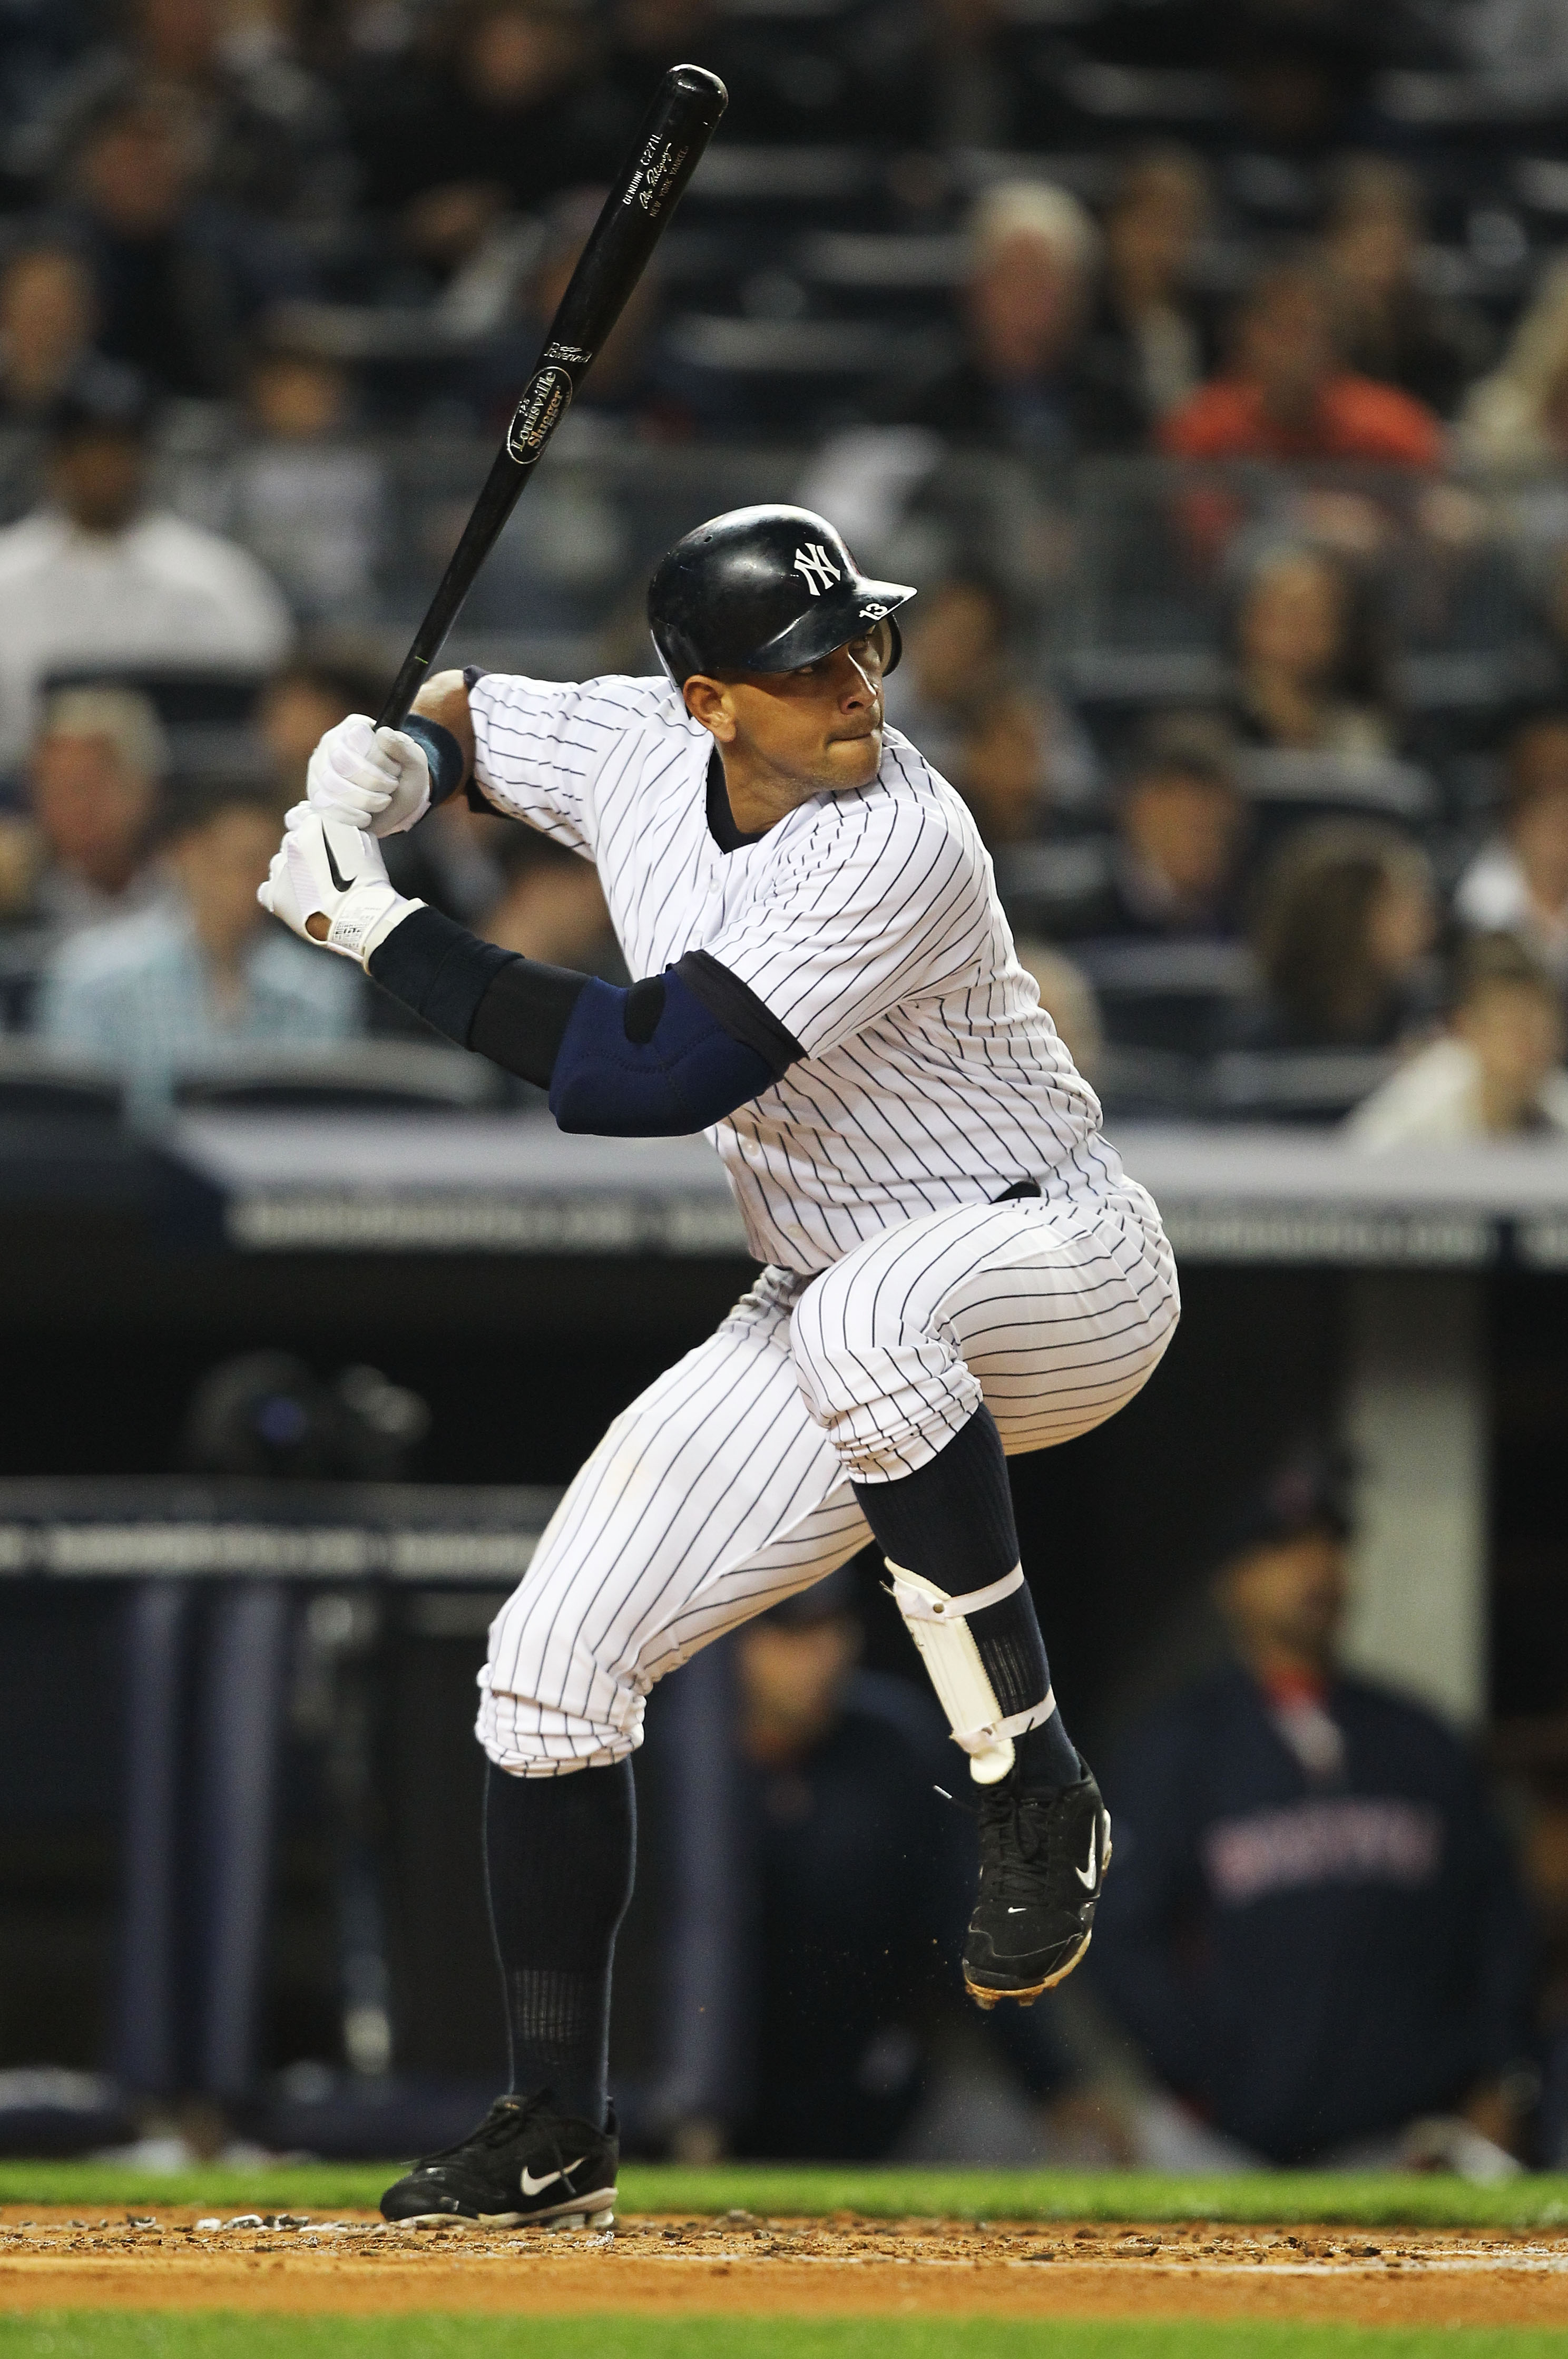 NEW YORK, NY - MAY 15:  Alex Rodriguez #13 of the New York Yankees in action against the Boston Red Sox during their game on May 15, 2011 at Yankee Stadium in the Bronx borough of New York City.  (Photo by Al Bello/Getty Images)